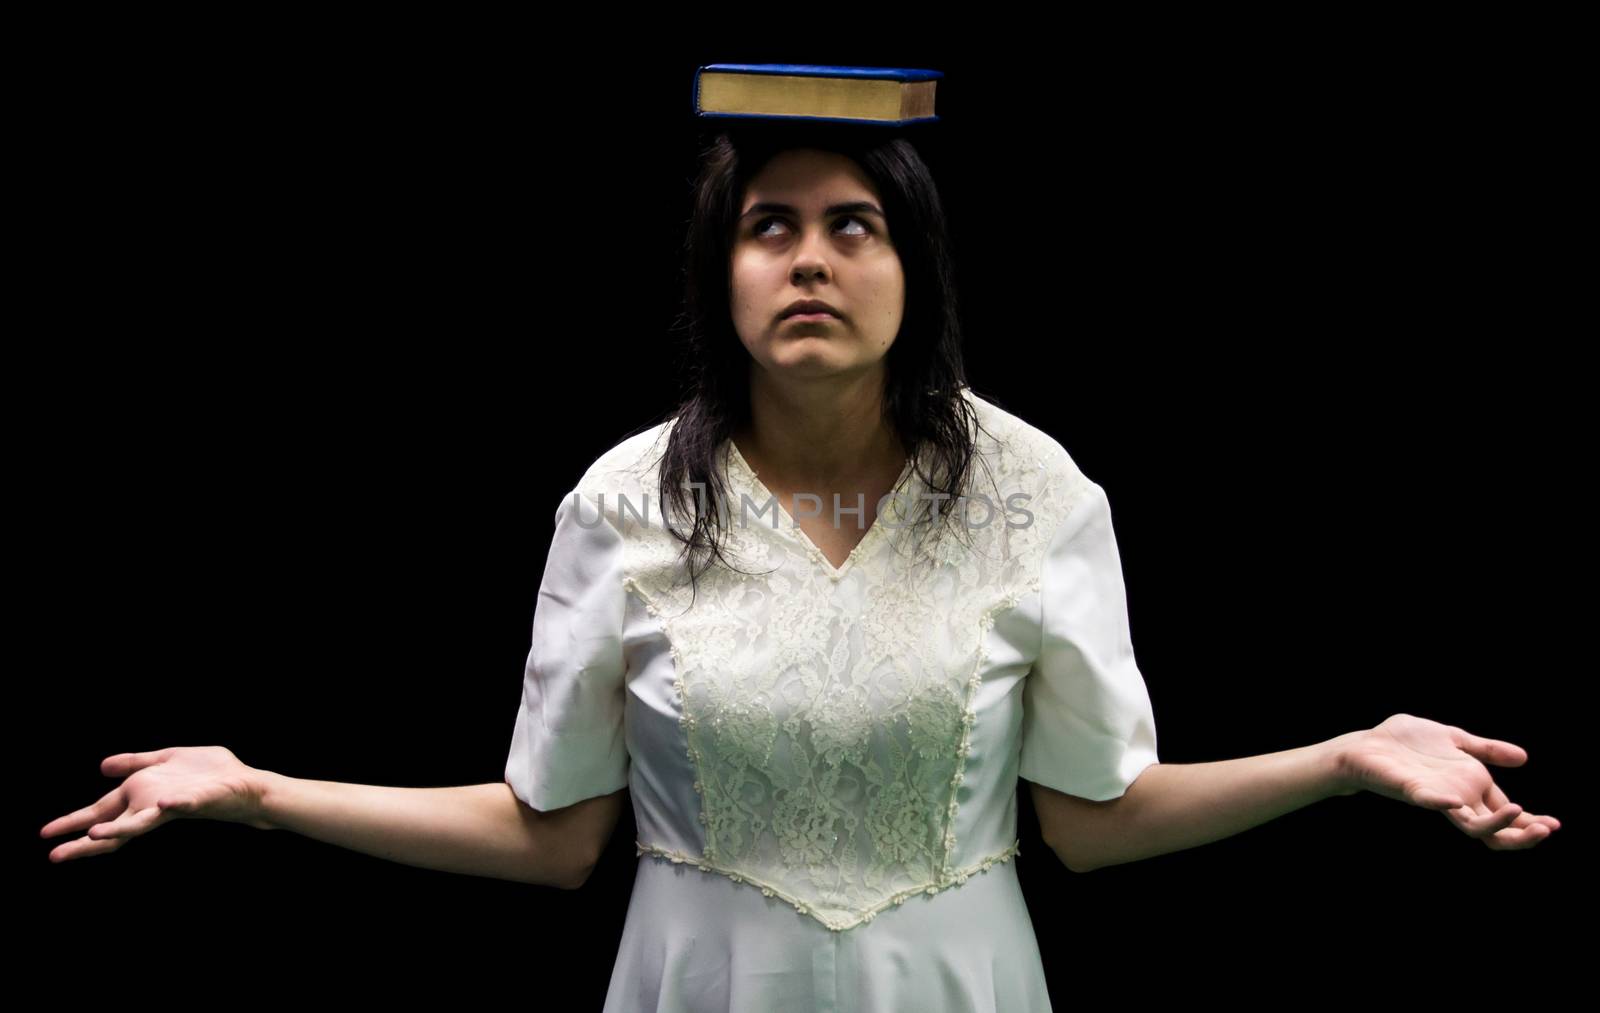 Latina teenager in white dress standing in front of black background balancing book on her head and rolling her eyes